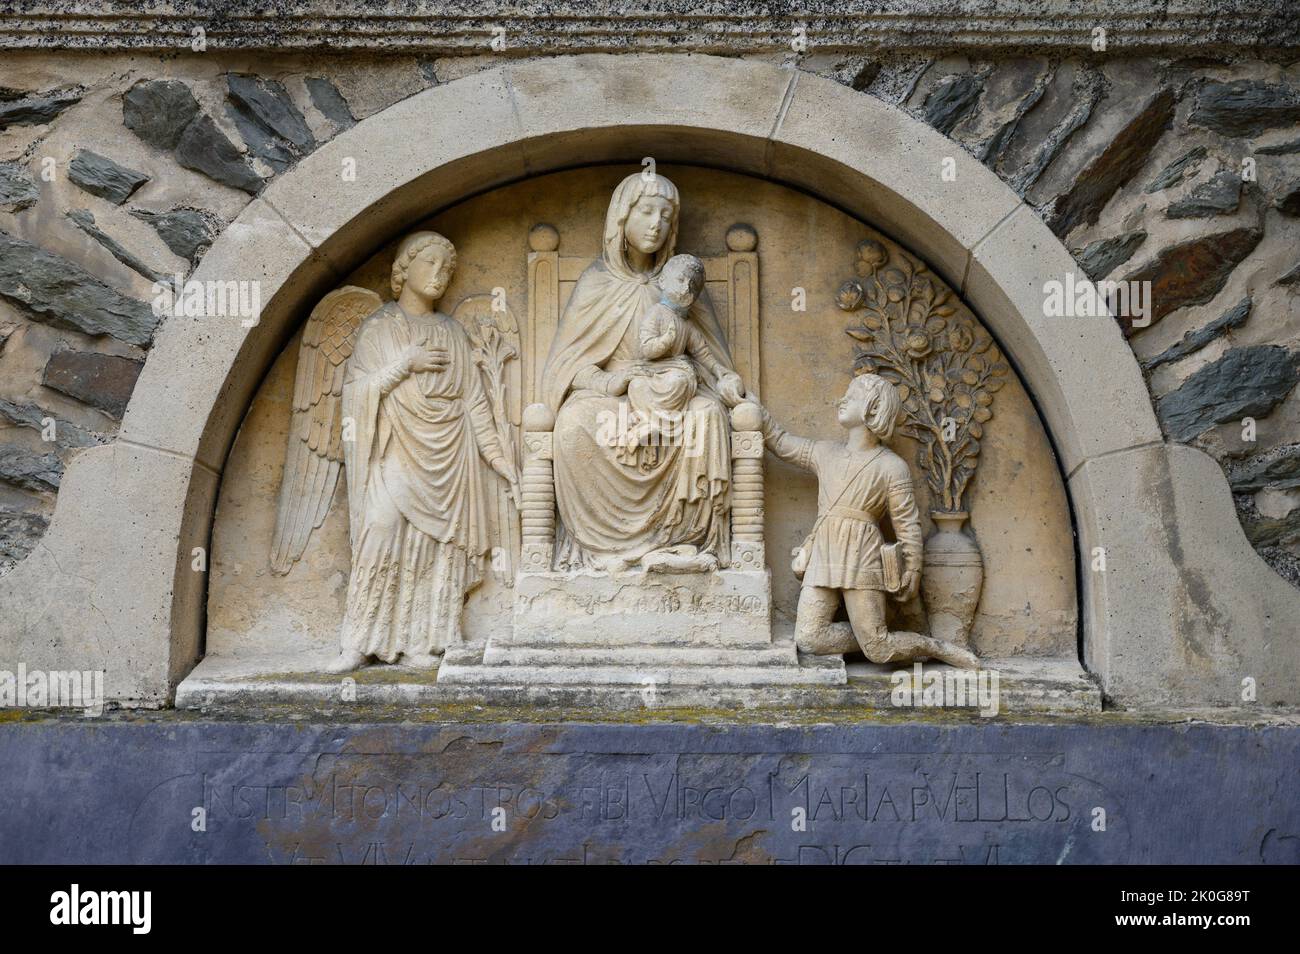 Sculpture of the Virgin Mary with Infant Jesus. Church of Saints Cosmas & Damian in Clervaux, Luxembourg. Stock Photo